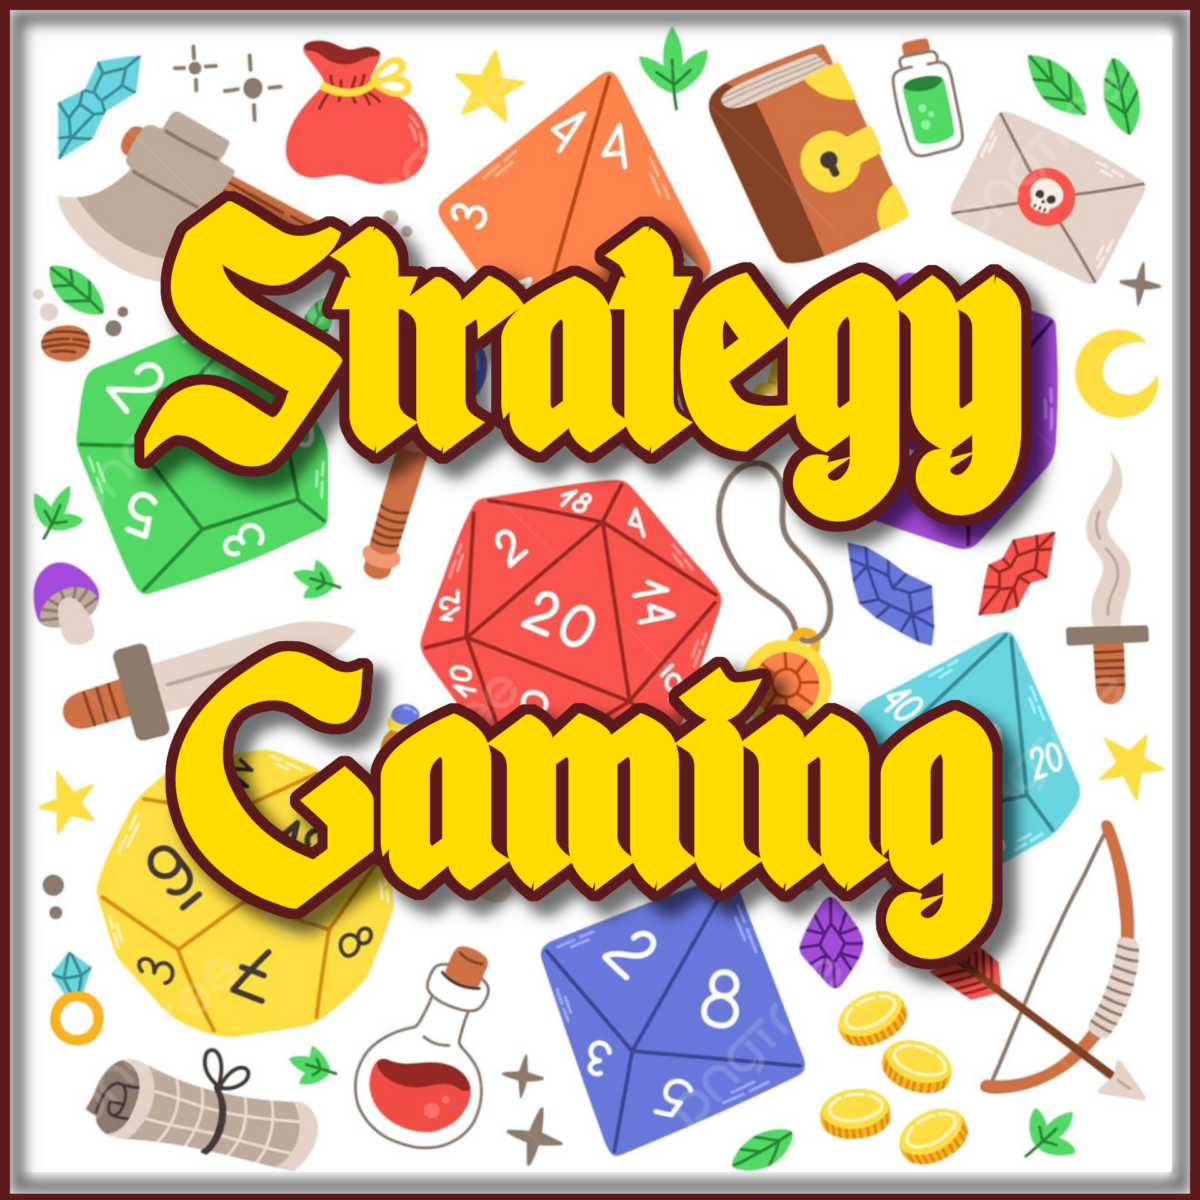 Strategy Gaming Group